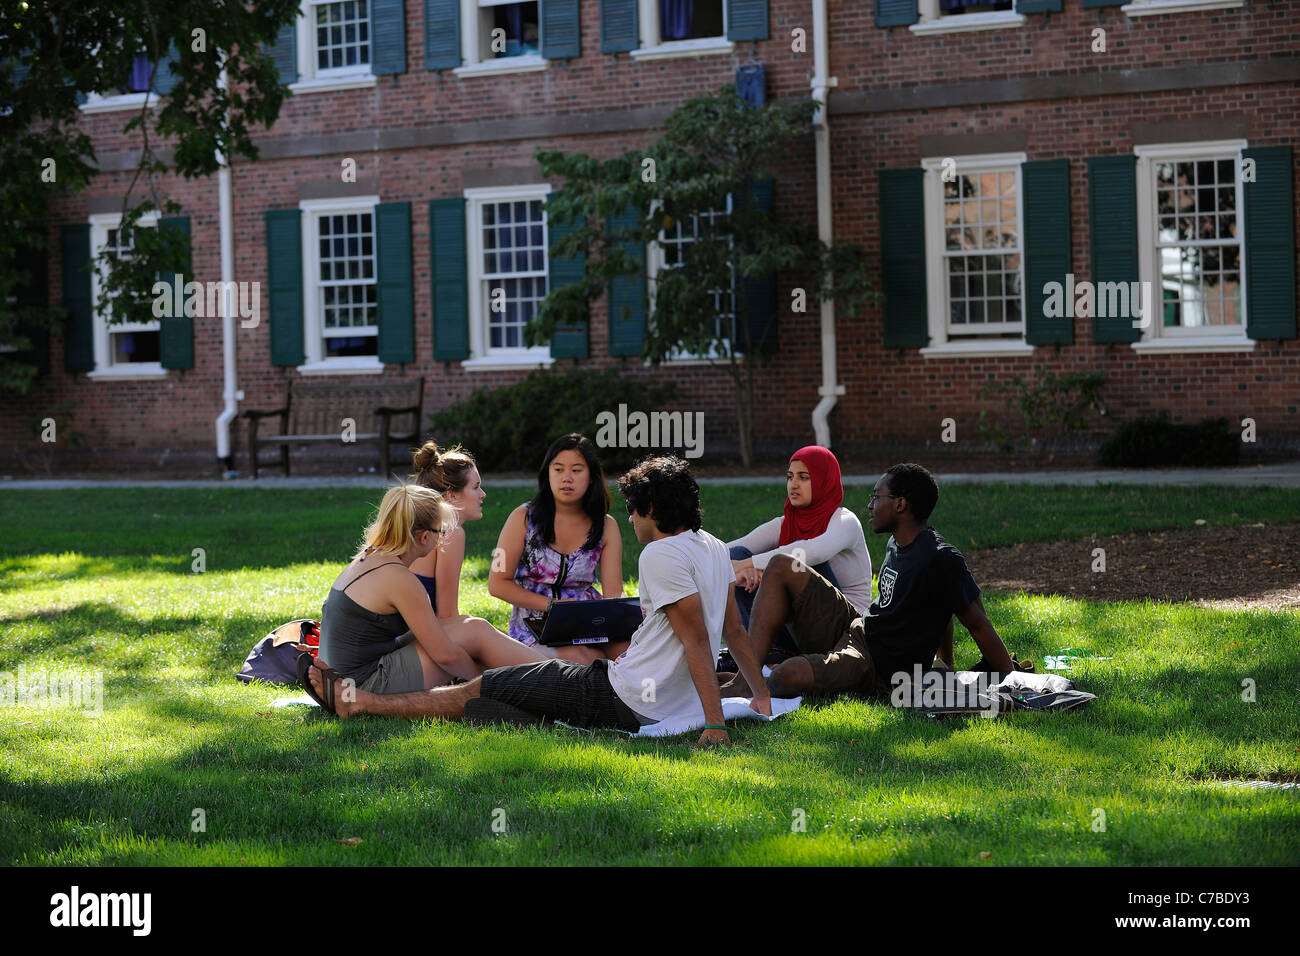 Yale University students at summer school in Pierson Residential college quad. Stock Photo